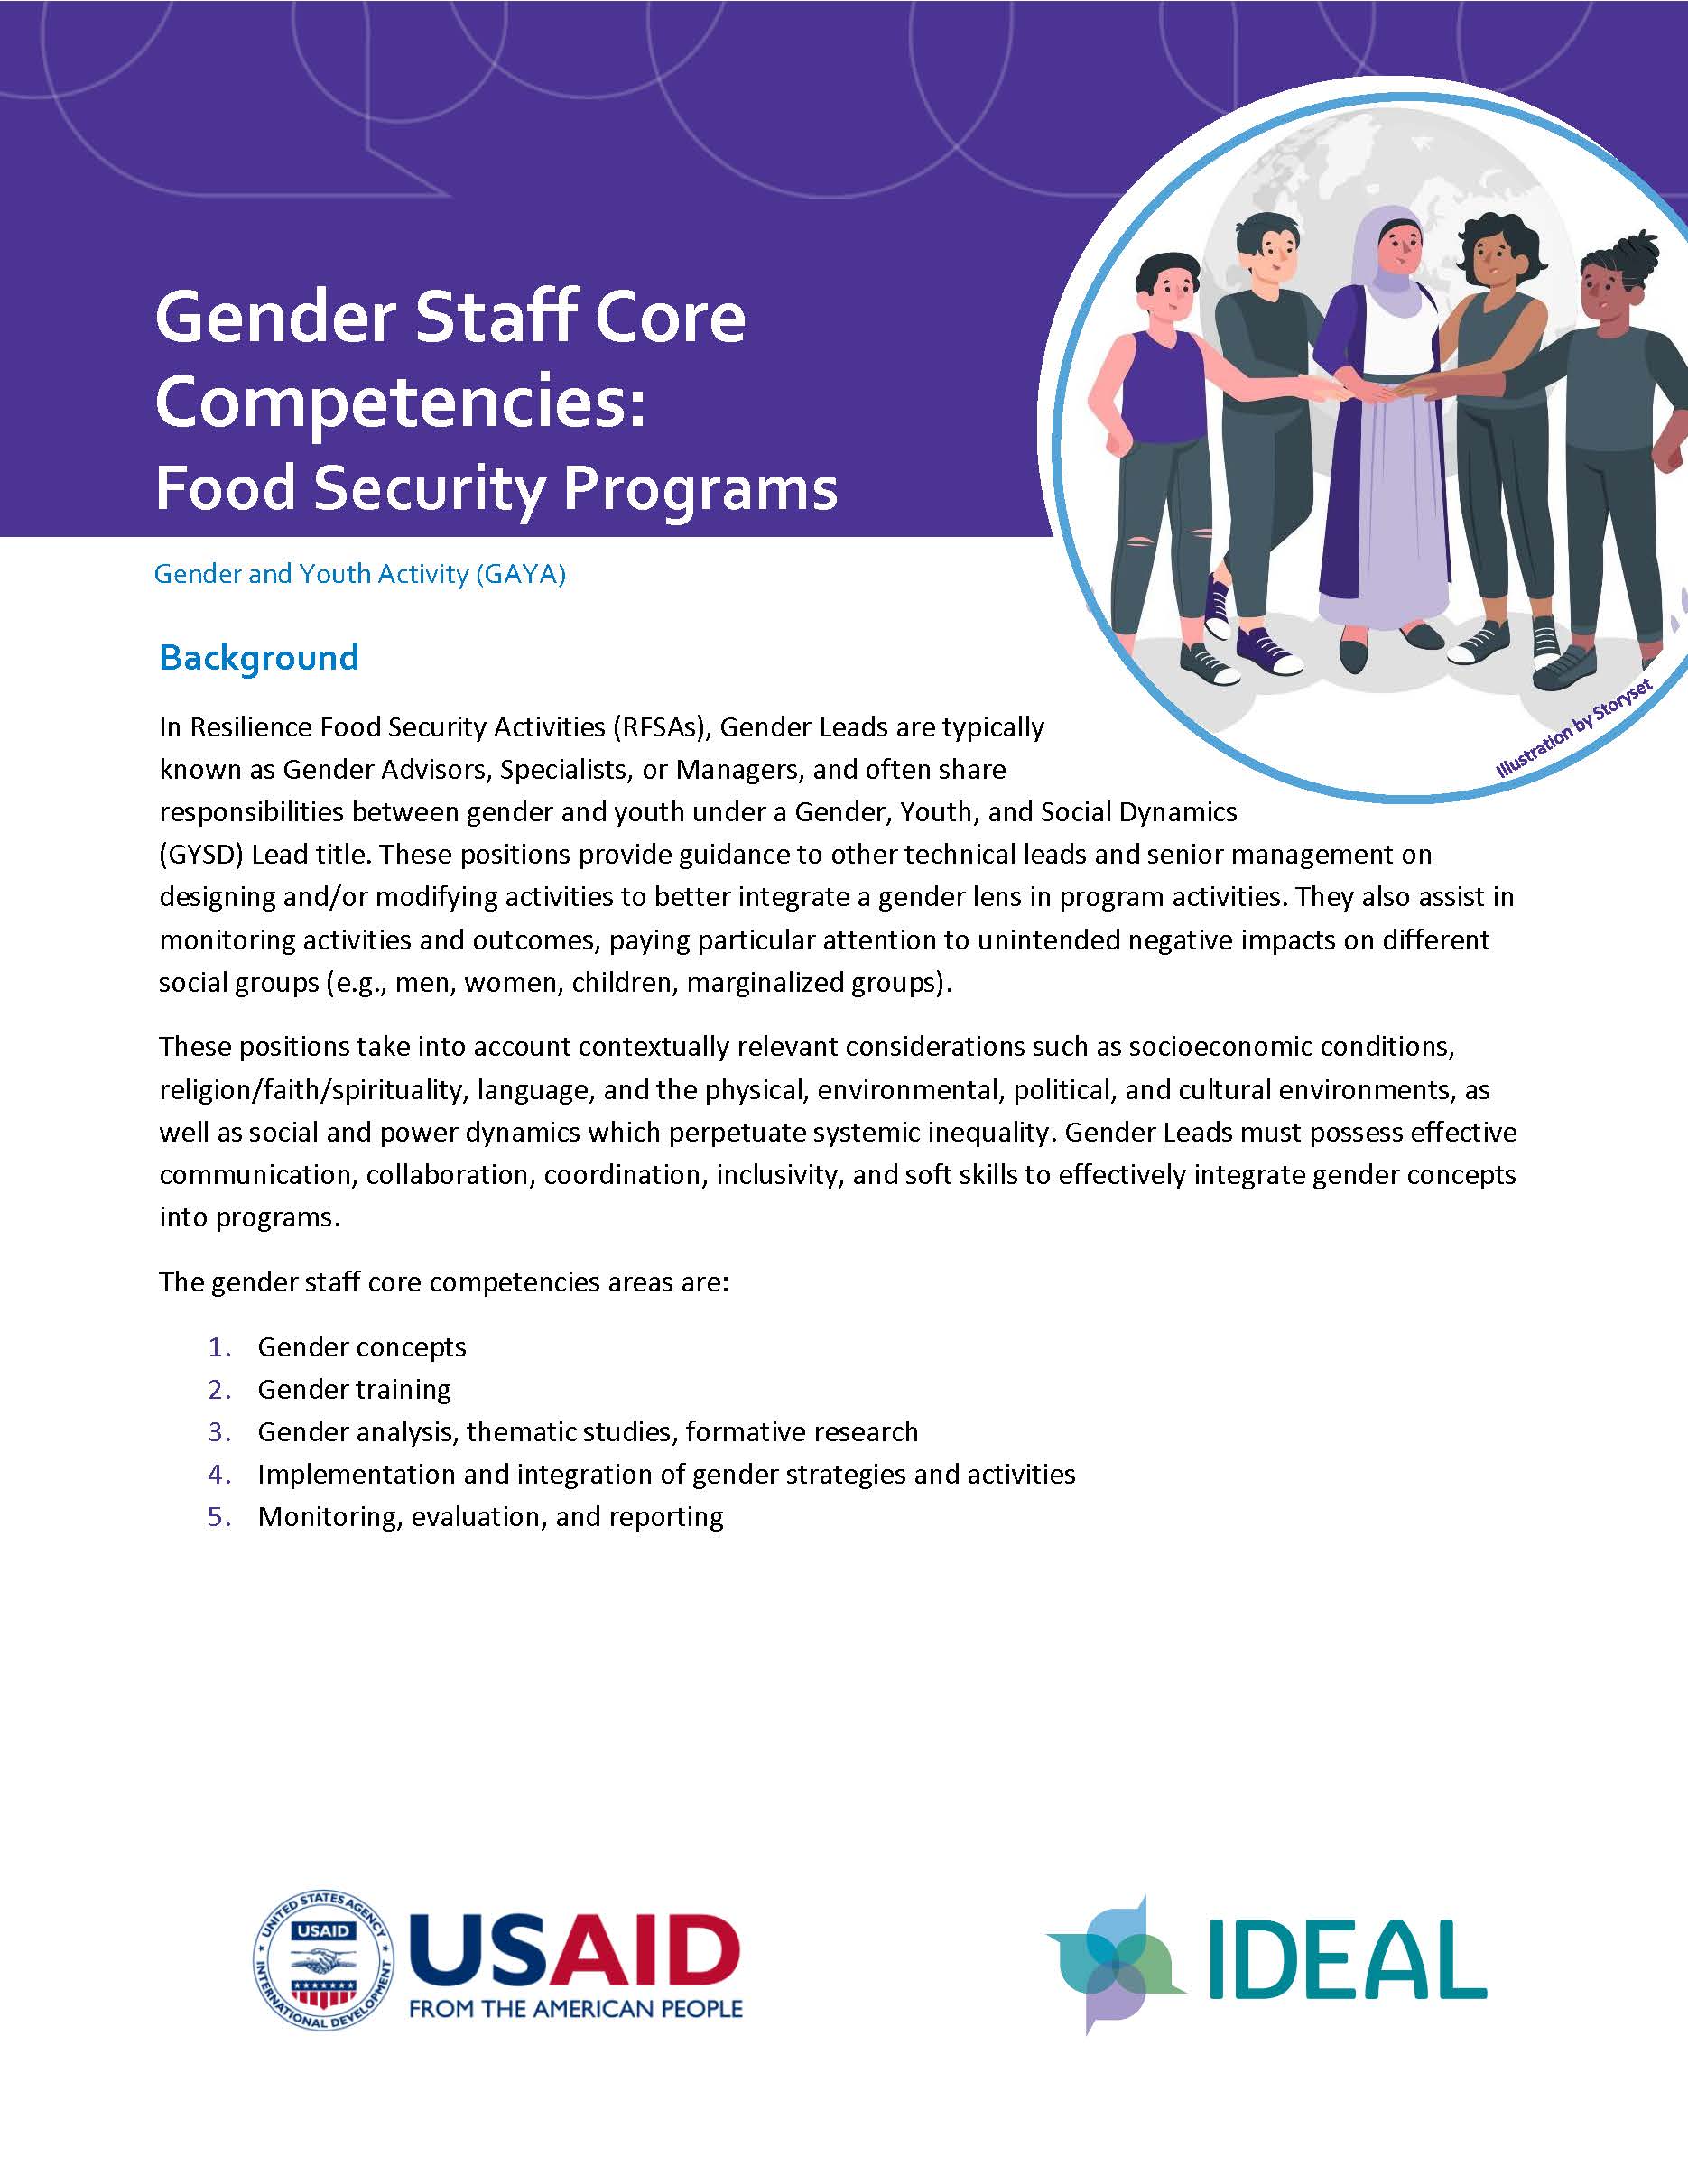 Report cover page, reading "Gender Staff Core Competencies: Food Security Programs" with a graphic of five people standing in front of a globe. The other text on the page is not visible.